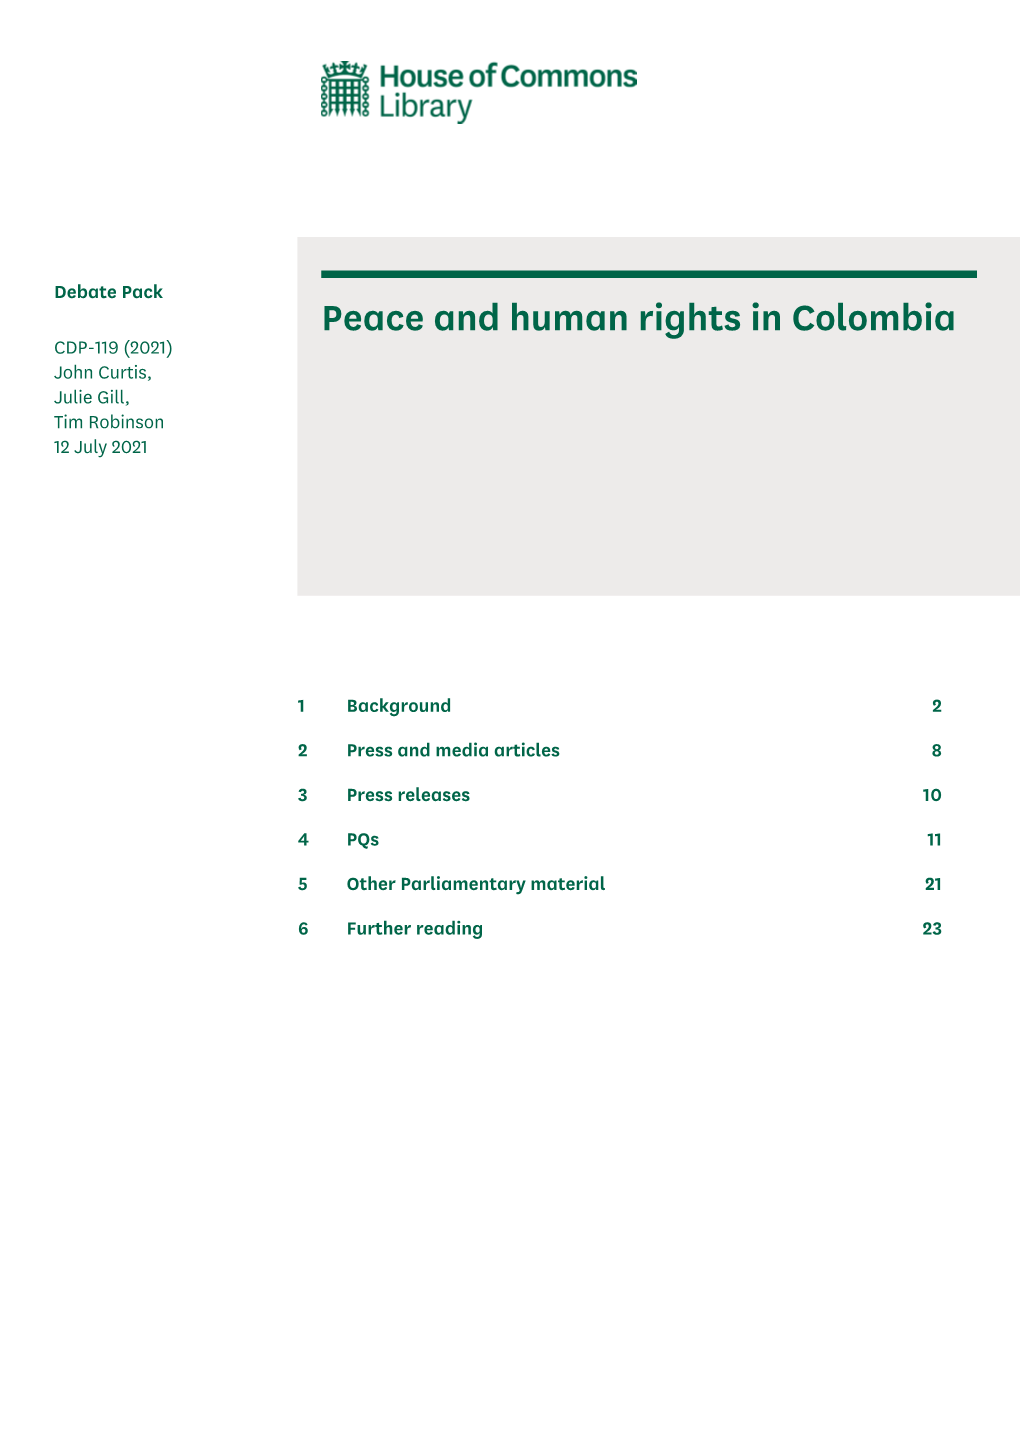 Peace and Human Rights in Colombia CDP-119 (2021) John Curtis, Julie Gill, Tim Robinson 12 July 2021